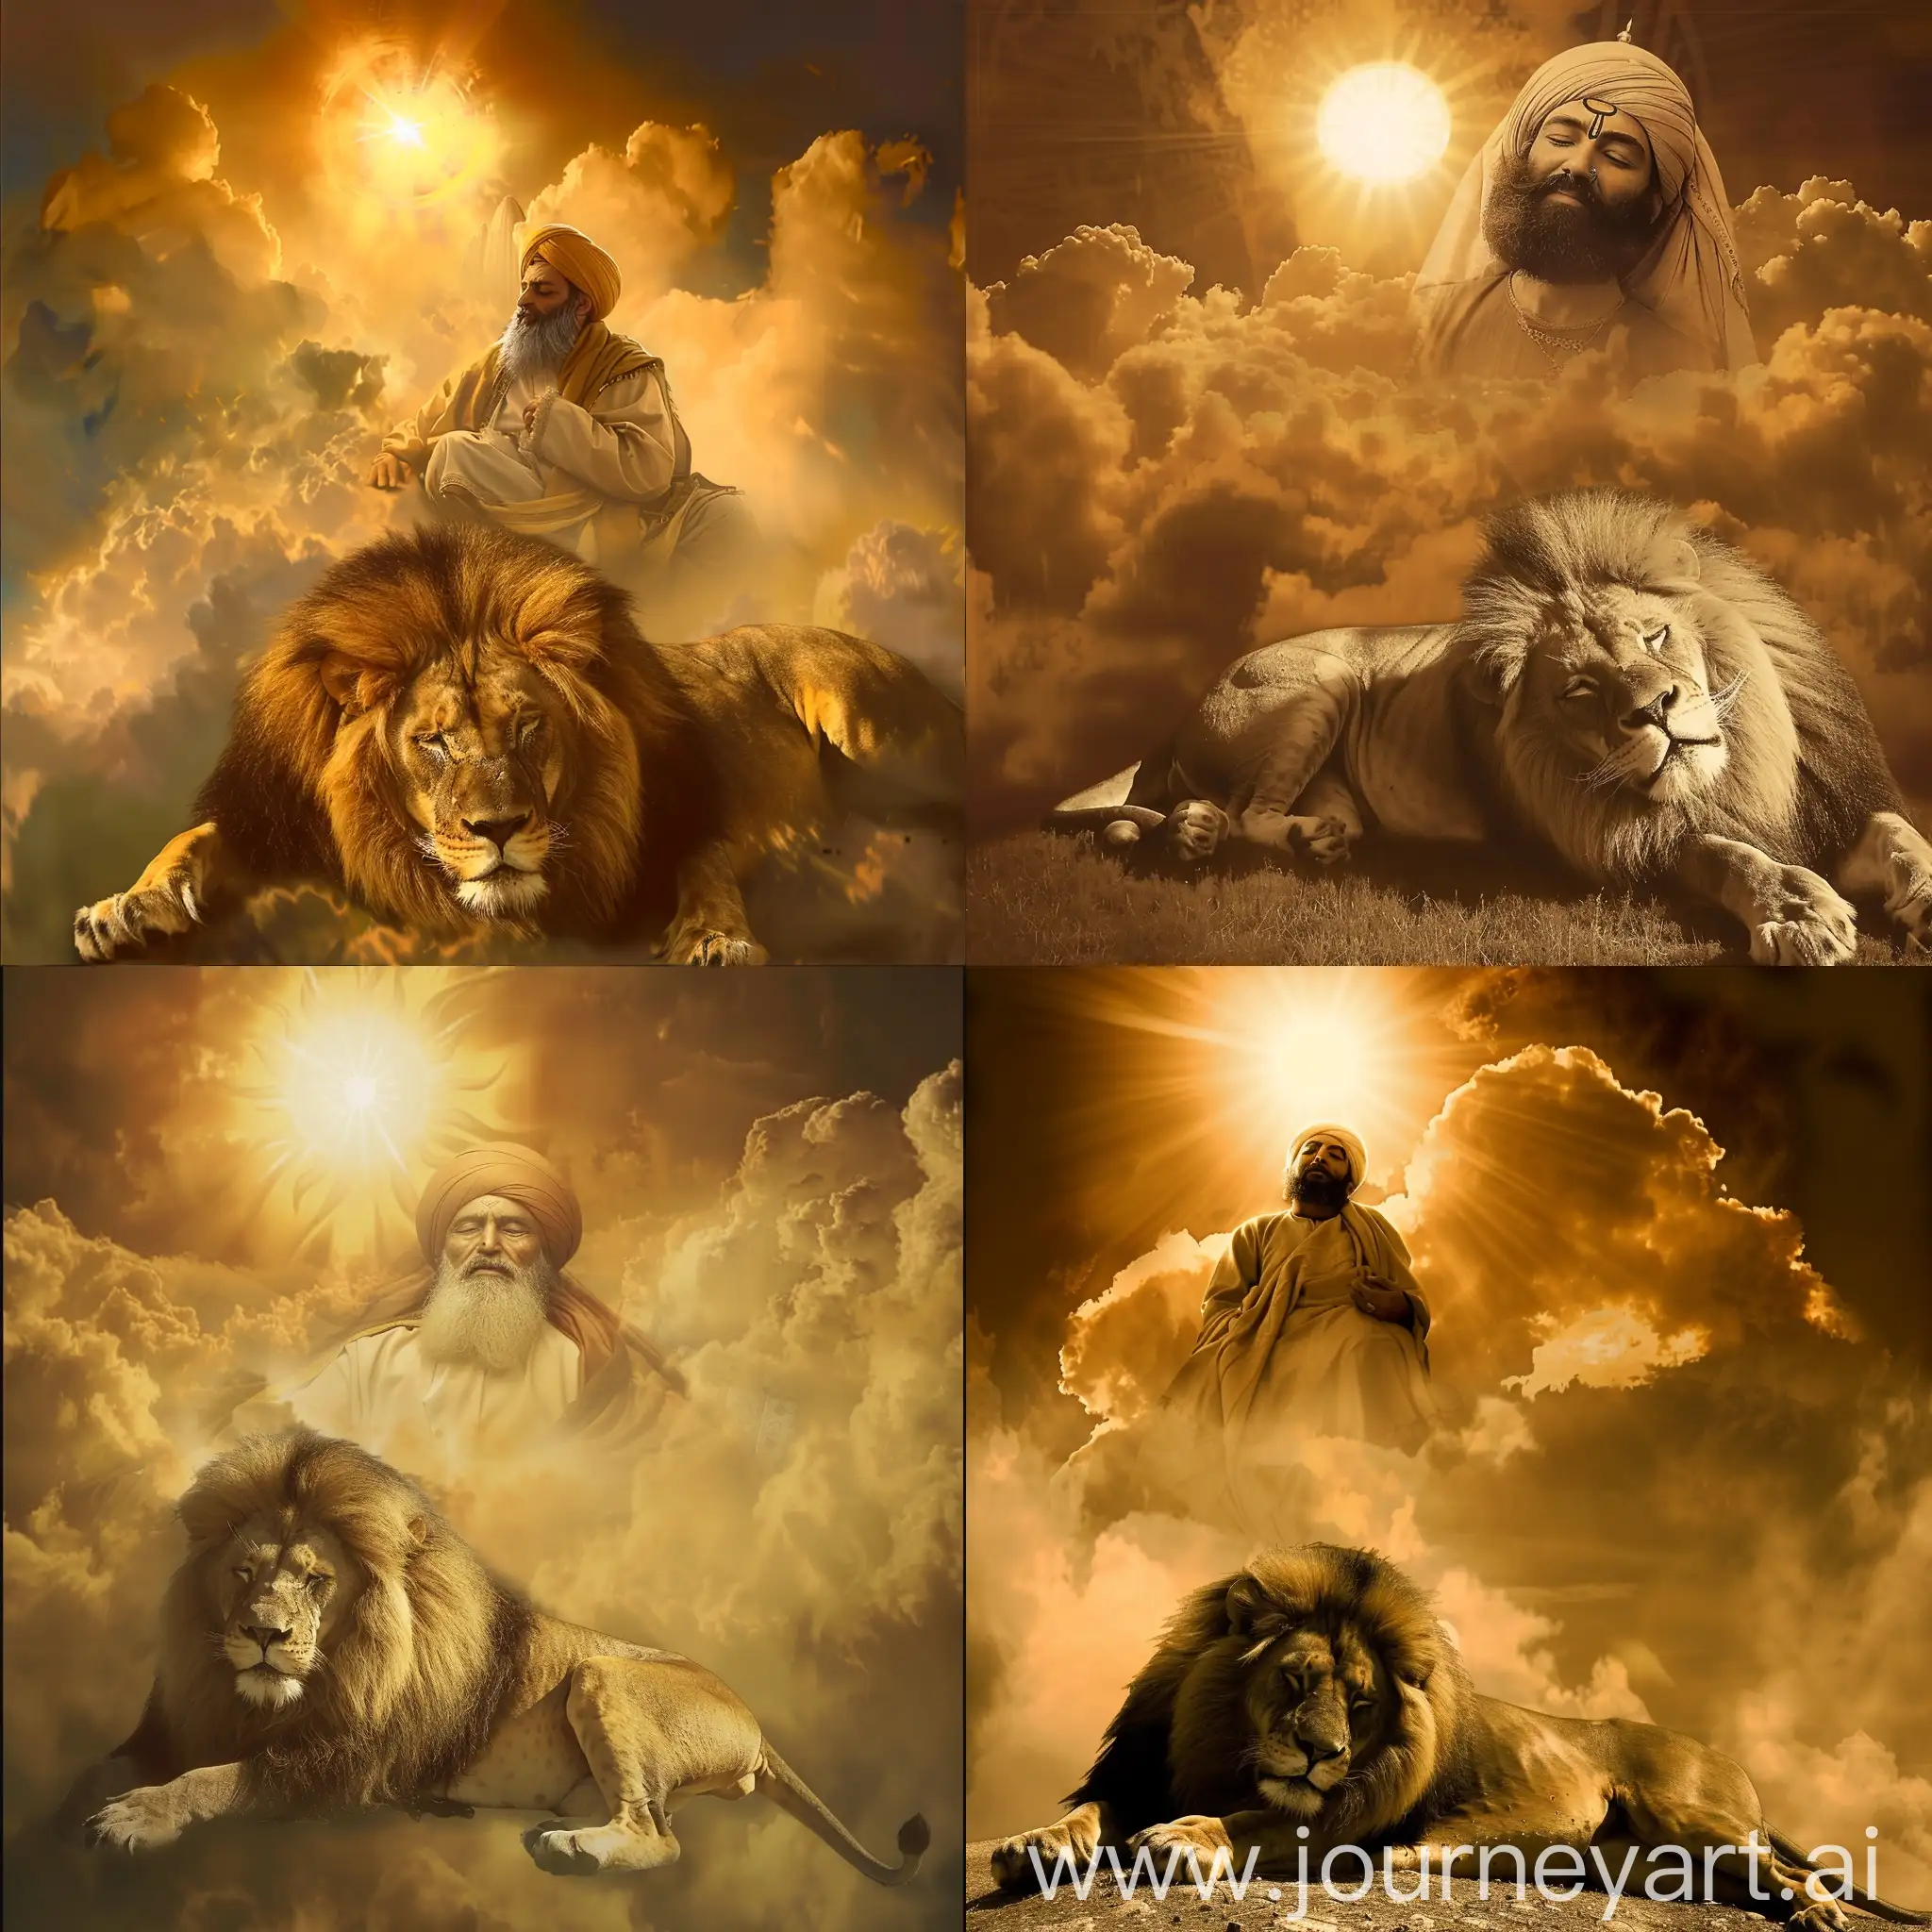 Create this imaginary picture for me: place Hazrat Ali in the sky, behind which a sun is shining, and in front of Hazrat Ali, a male lion is sleeping.